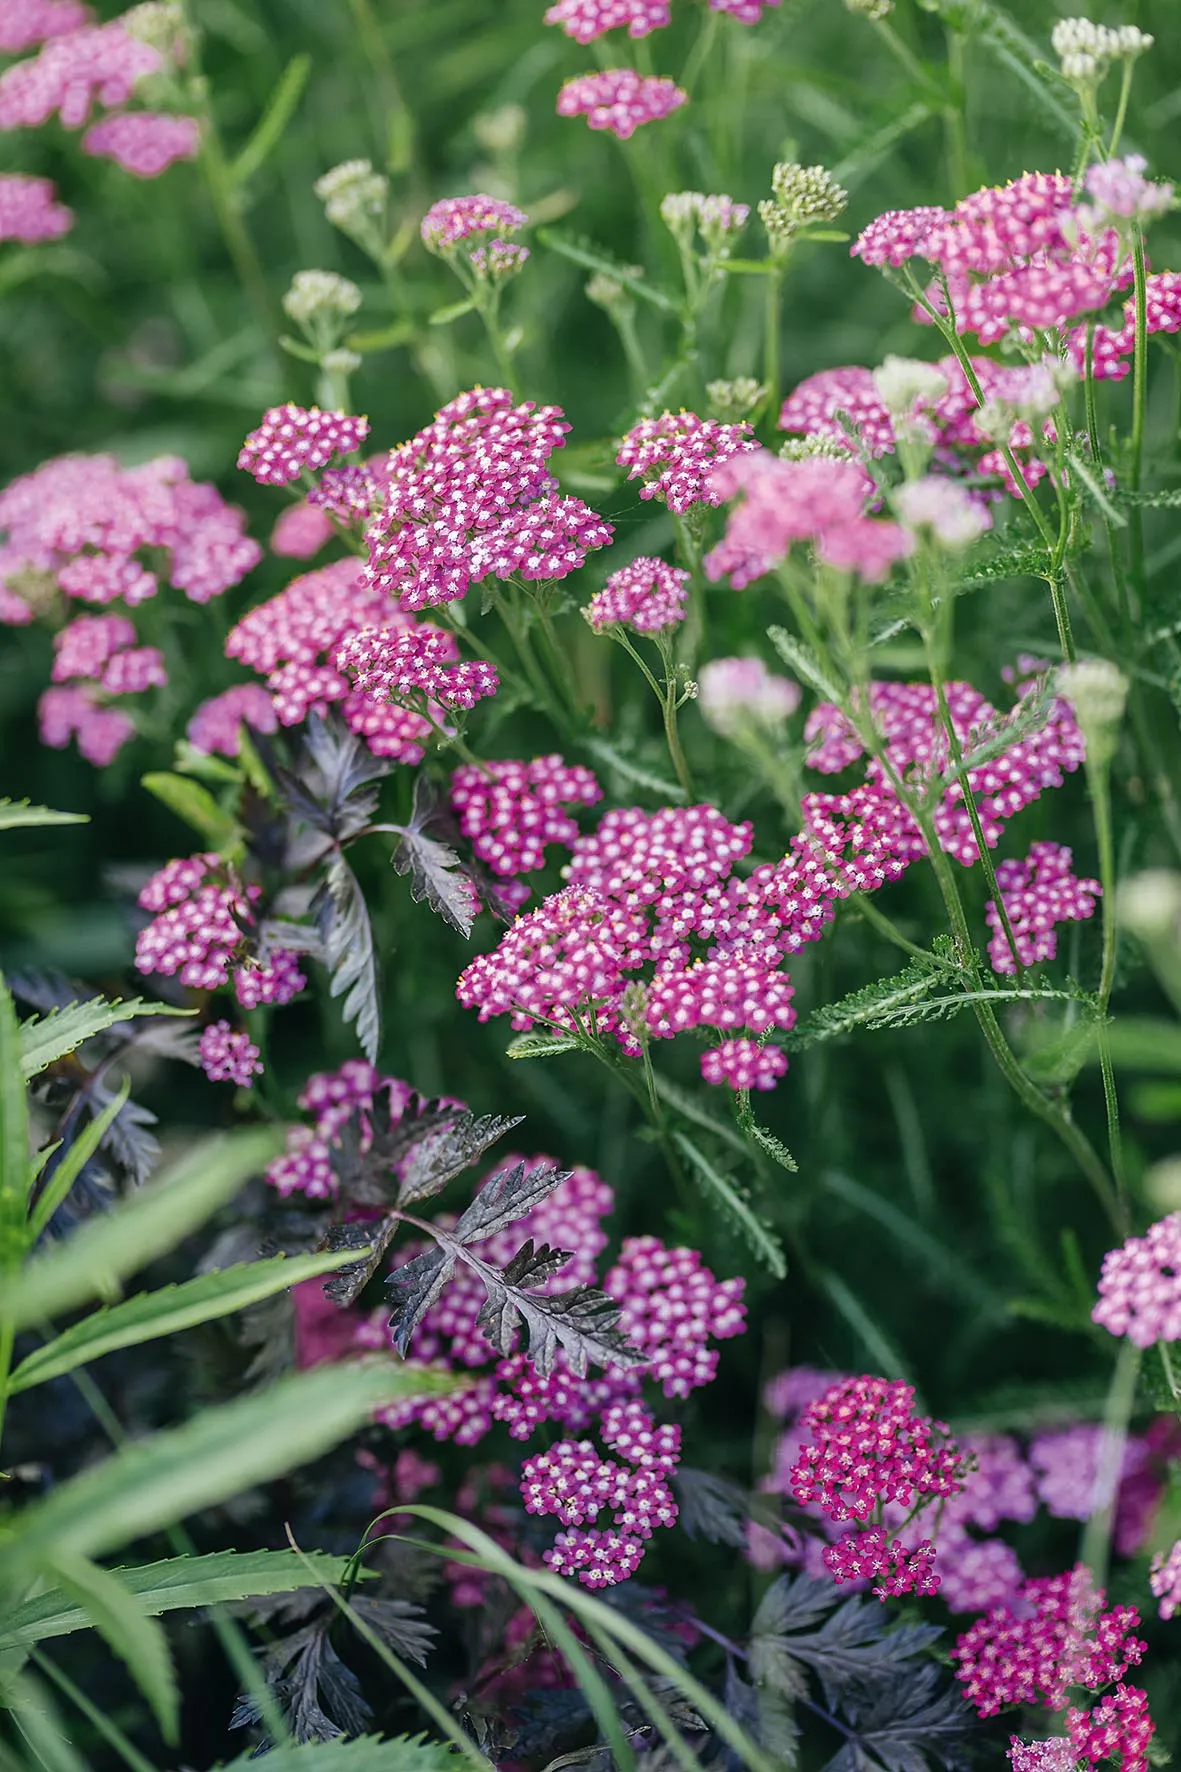 Achillea millefolium ‘Cerise Queen’. This hoverfly magnet copes with both exposure and drought, but requires good drainage in winter. Cut back in early spring. Fabulous colour over fern-like foliage. 60cm. RHS H7.